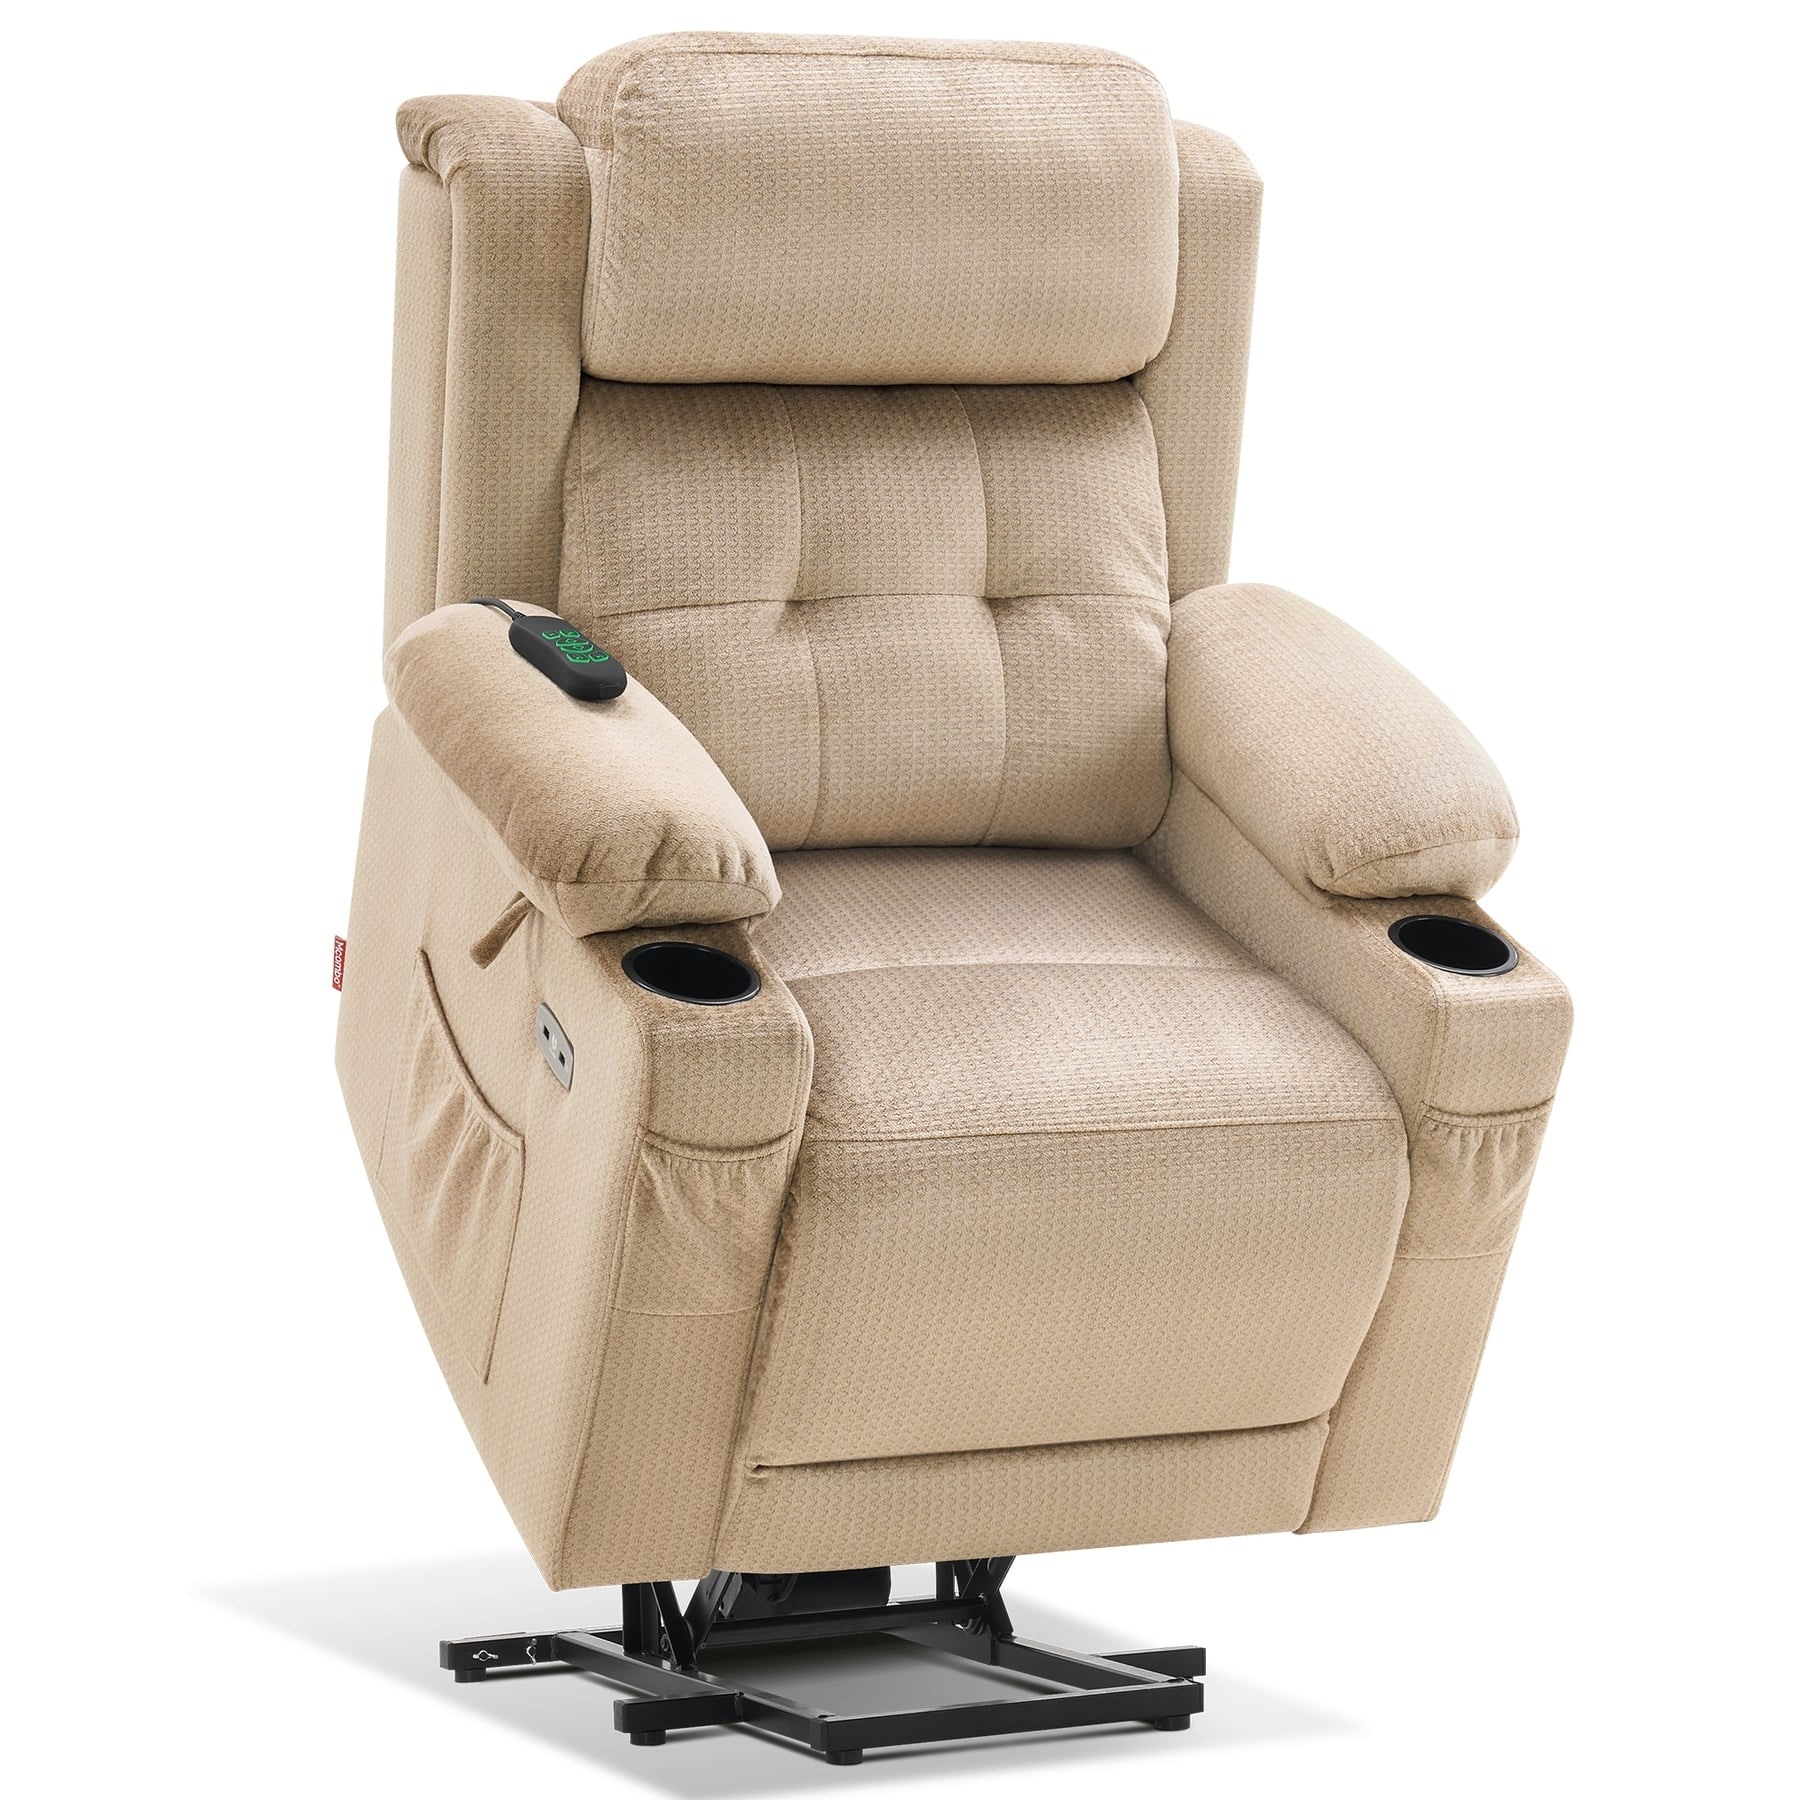 Mcombo Large Lift Recliner Chair with Massage and Heat for Elderly, Extended Footrest, Cup Holders, USB Ports, Faux Leather 7539 - Black